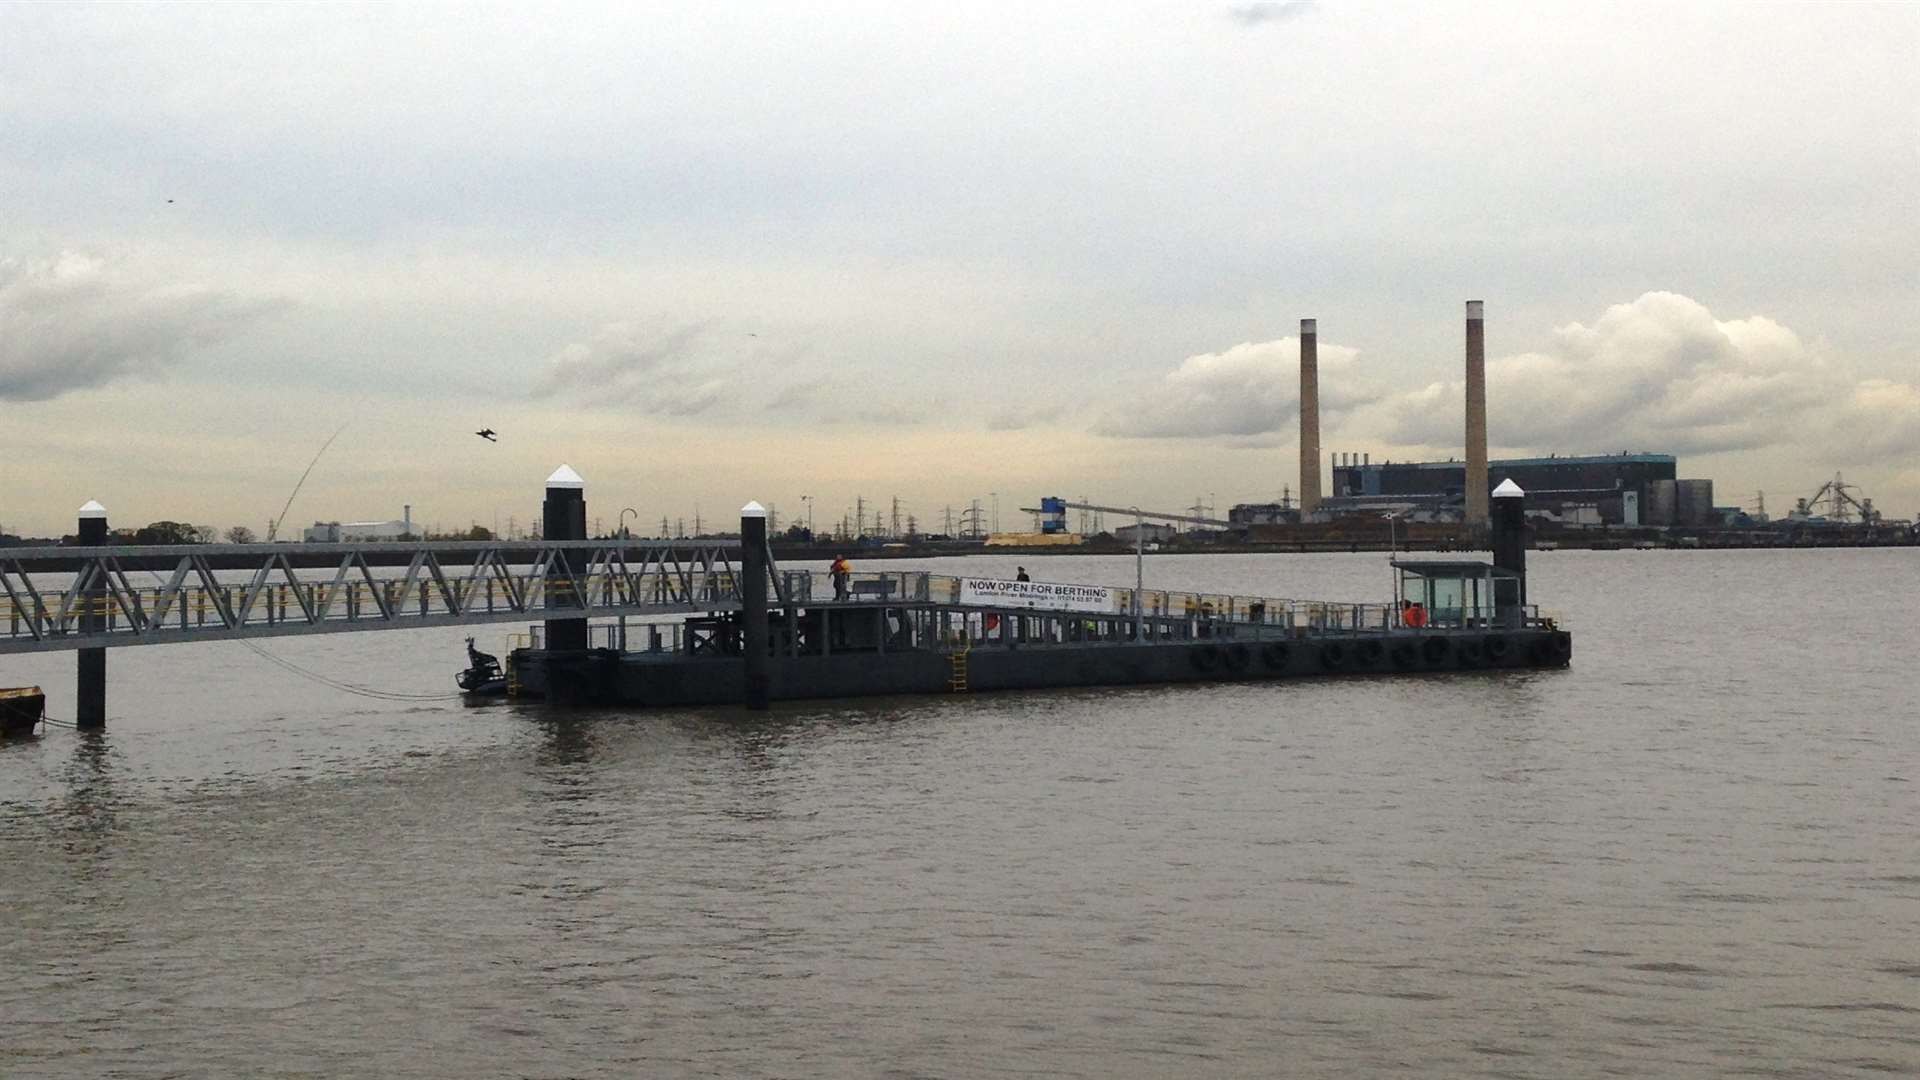 Emergency services were called to the pontoon at Gravesend